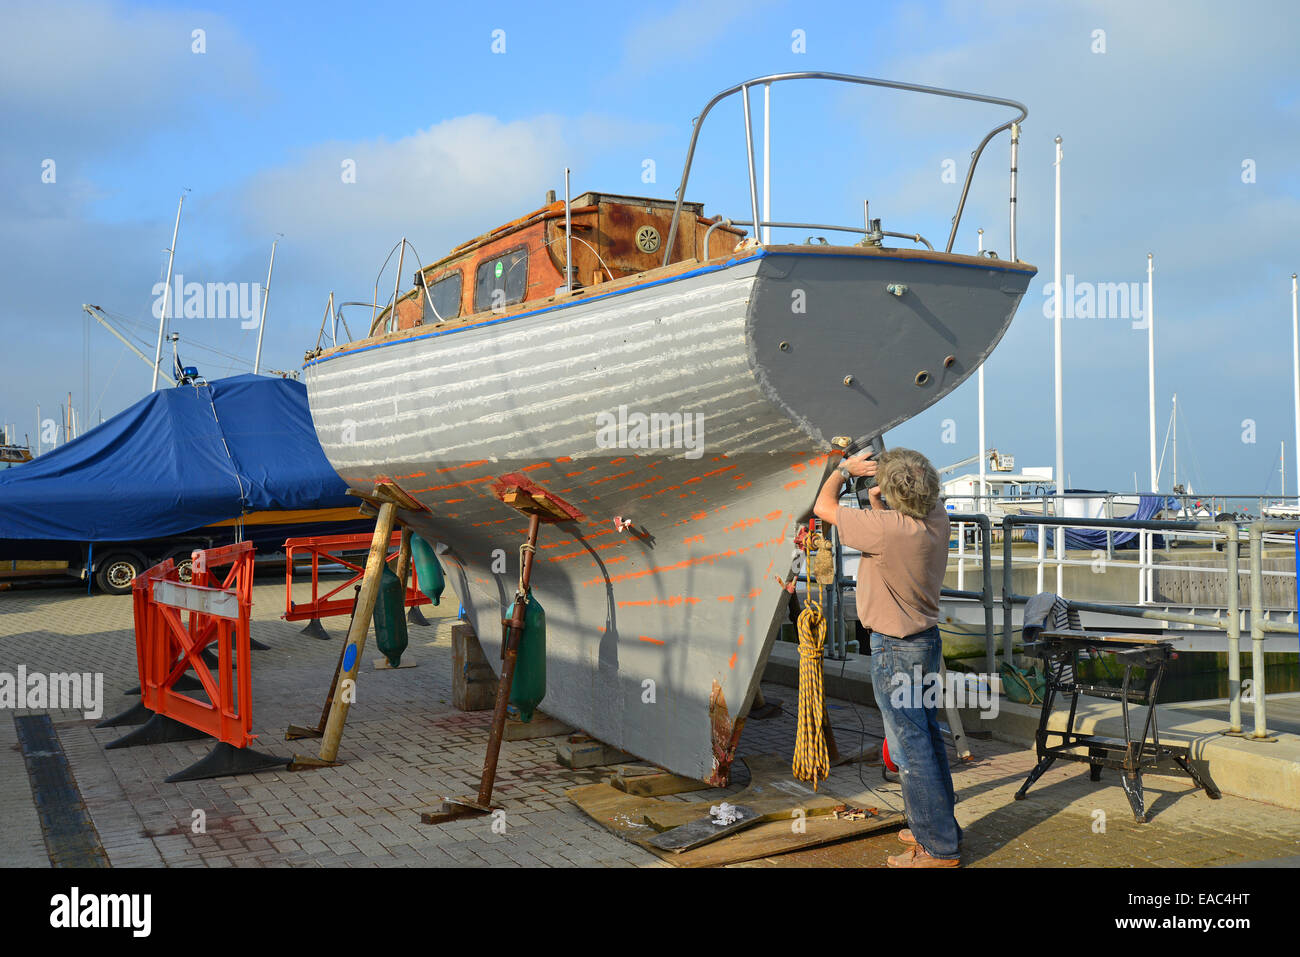 Man fixing keel of old wooden yacht, Cowes Harbour, Cowes, Isle of Wight, England, United Kingdom Stock Photo